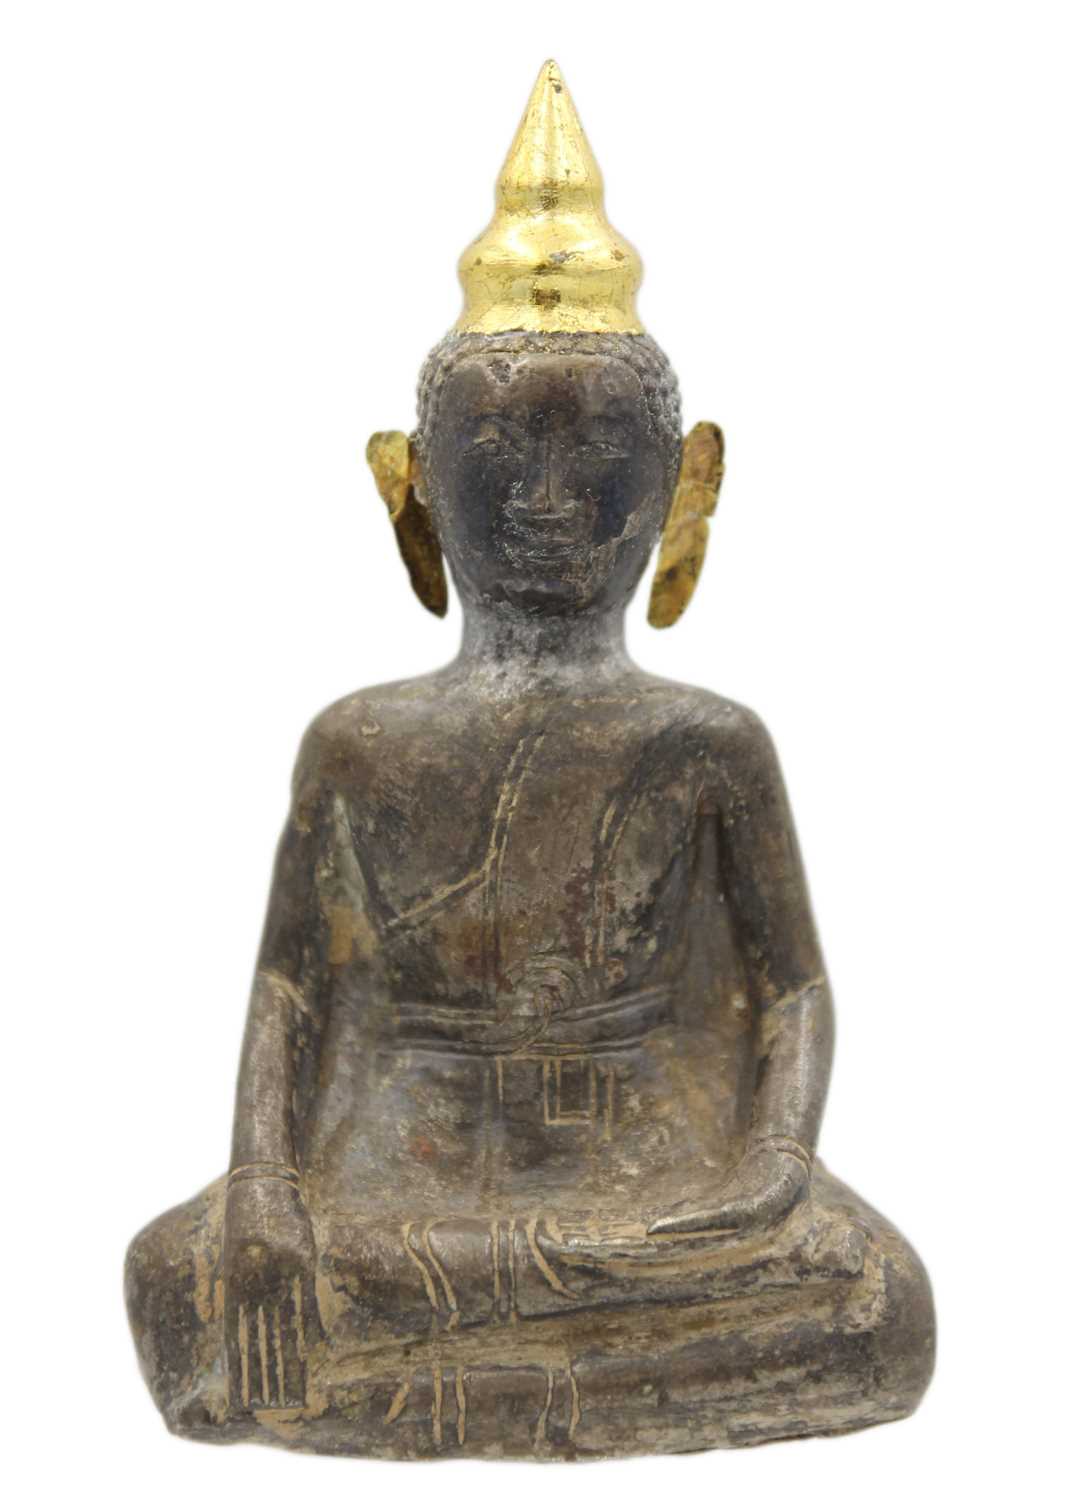 Lot 362 - A Chinese silver and wood Buddha, Qing Dynasty, 18th/19th century.